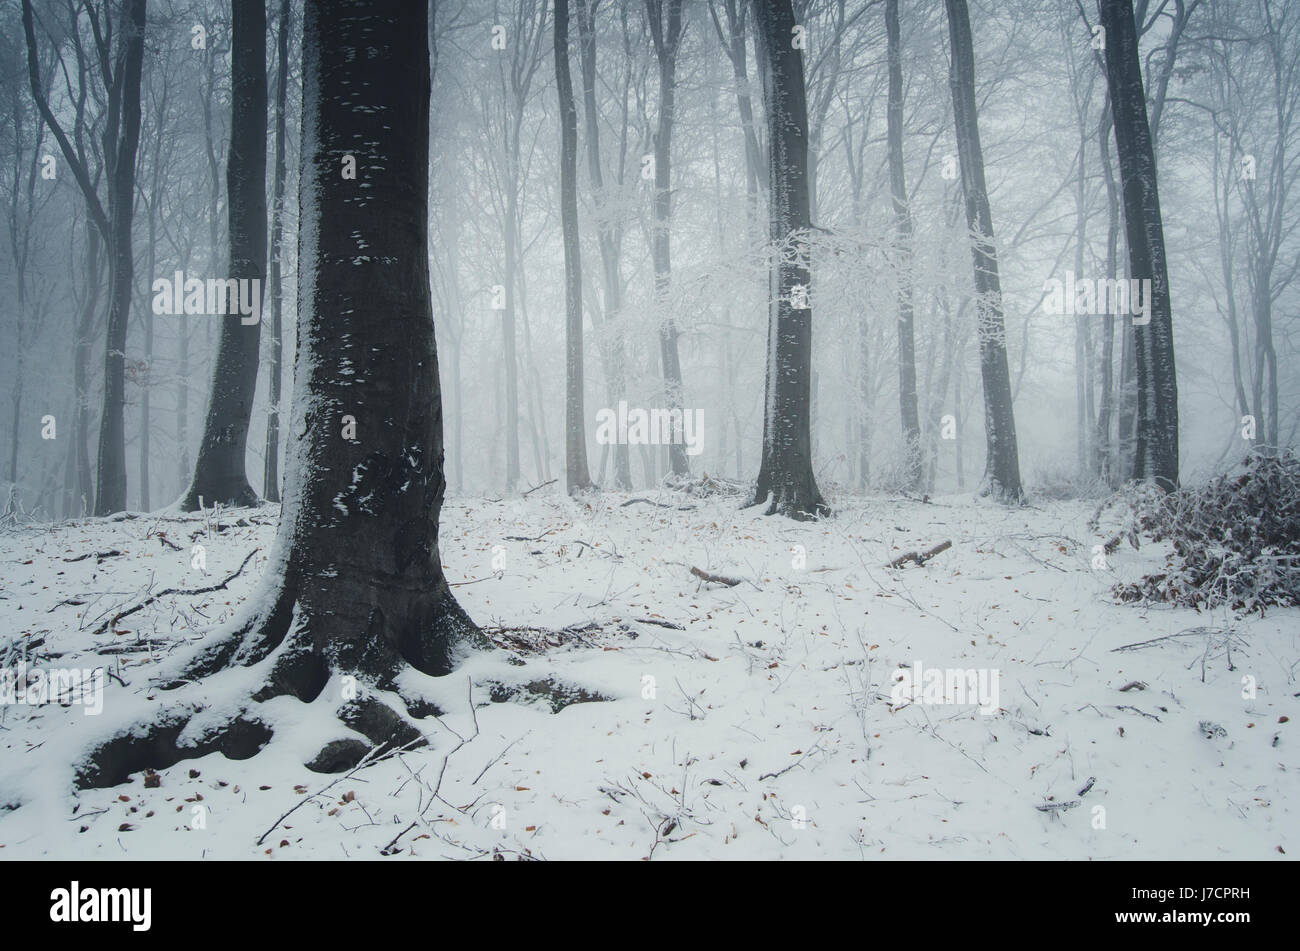 snow in winter forest fantasy landscape background Stock Photo